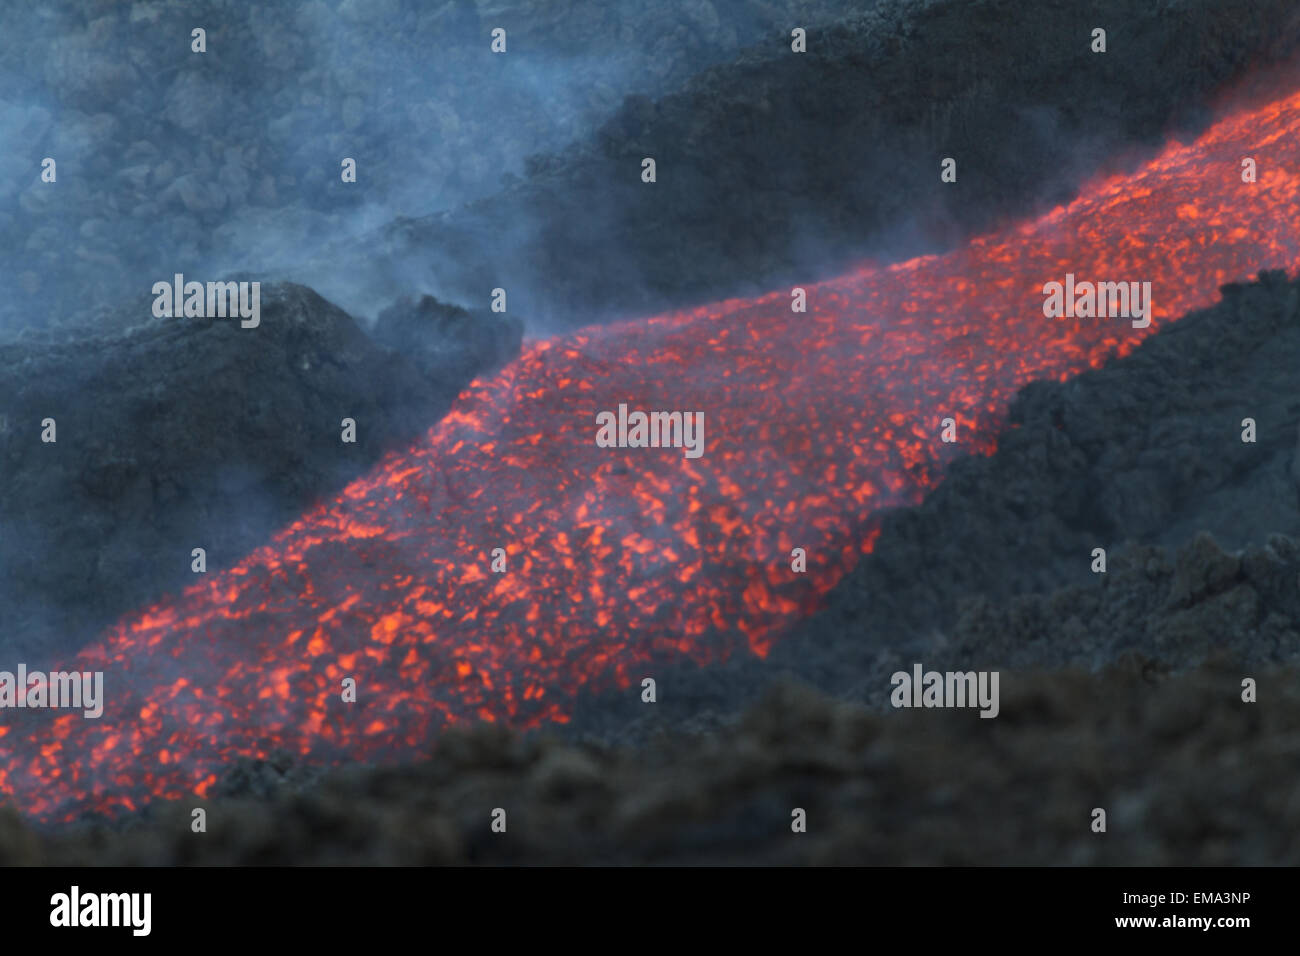 Lava flowing in channel Stock Photo